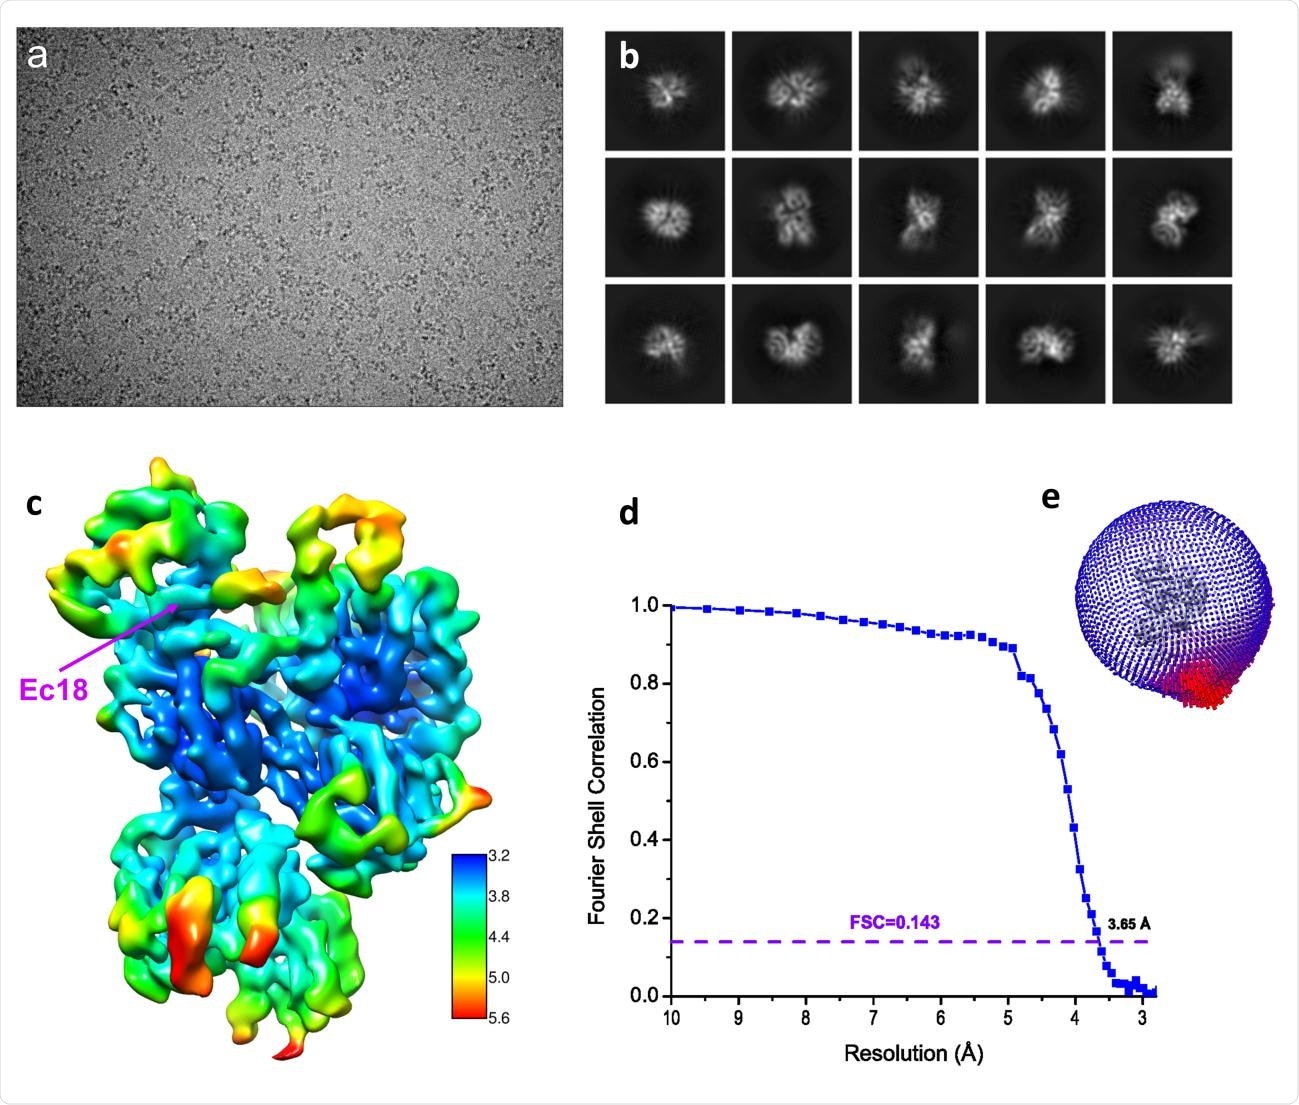 Structure determination by single-particle Cryo-EM. (a) A typical motion-corrected Cryo-EM micrograph. (b) 2D class averages. (c) Reconstructed map colored with local resolutions. (d) Fourier Shell Correlation (FSC) curve for the 3D reconstruction to determine the structure resolution. (e) Orientation distribution for particles used in 3D reconstruction.